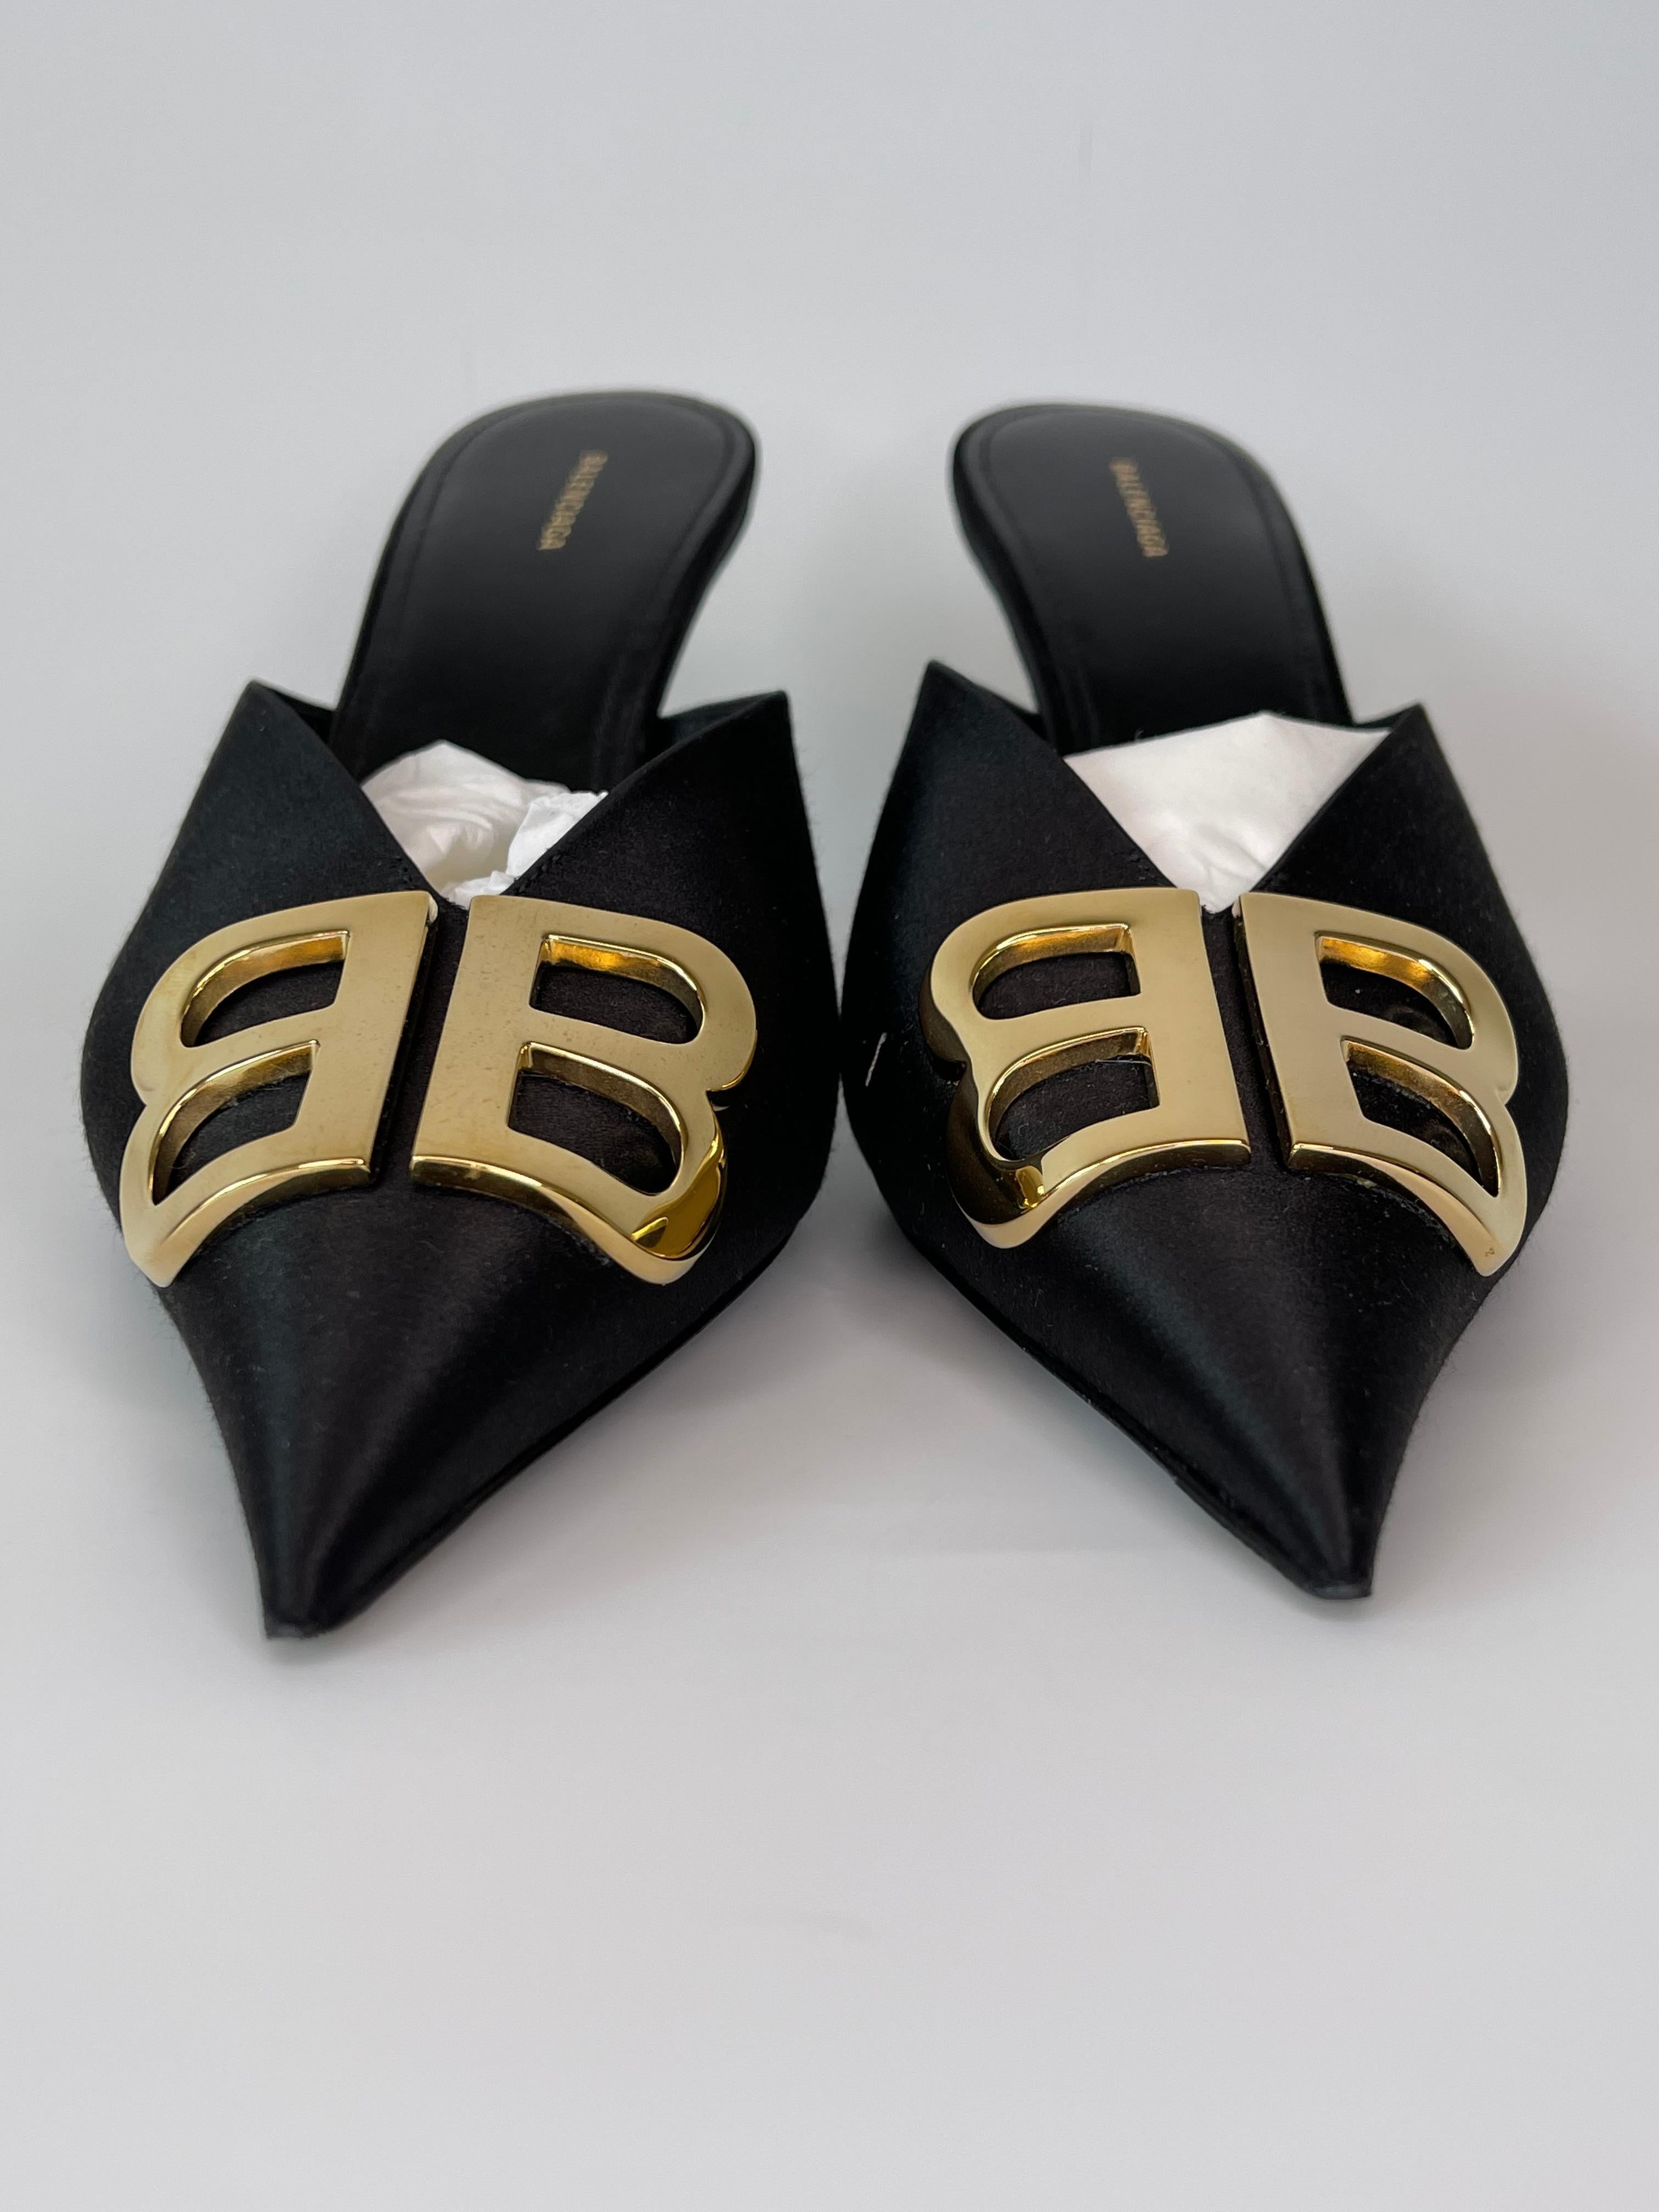 These pointed-toe mules are covered in black satin and feature the BB metal logo on the uppers, 80 mm (4 inch) heels, leather lining and a leather sole. 

COLOR: Black
MATERIAL: Satin 
ITEM CODE: 566642 
SIZE: 40 EU / 9 US
HEEL HEIGHT: 80 mm /